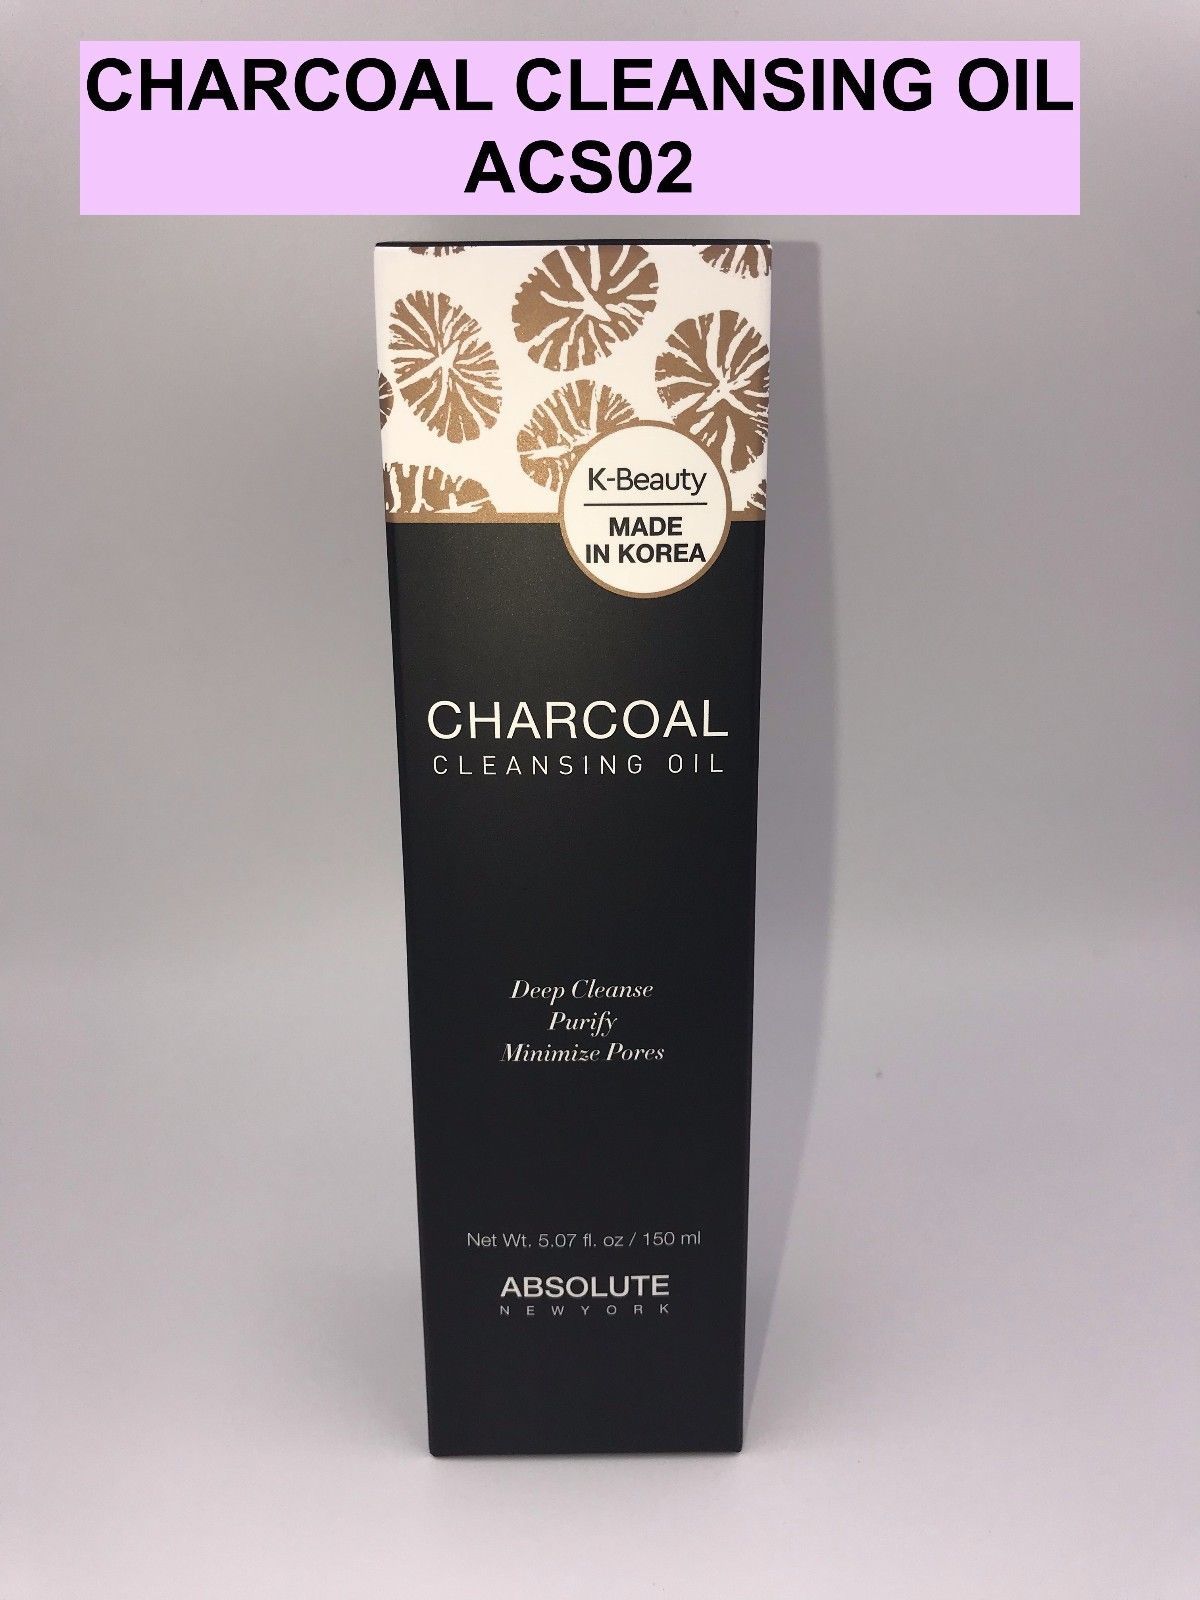 ABSOLUTE NEW YORK K-BEAUTY CHARCOAL CLEANSING OIL PURIFY MINIMIZE PORES ACS02